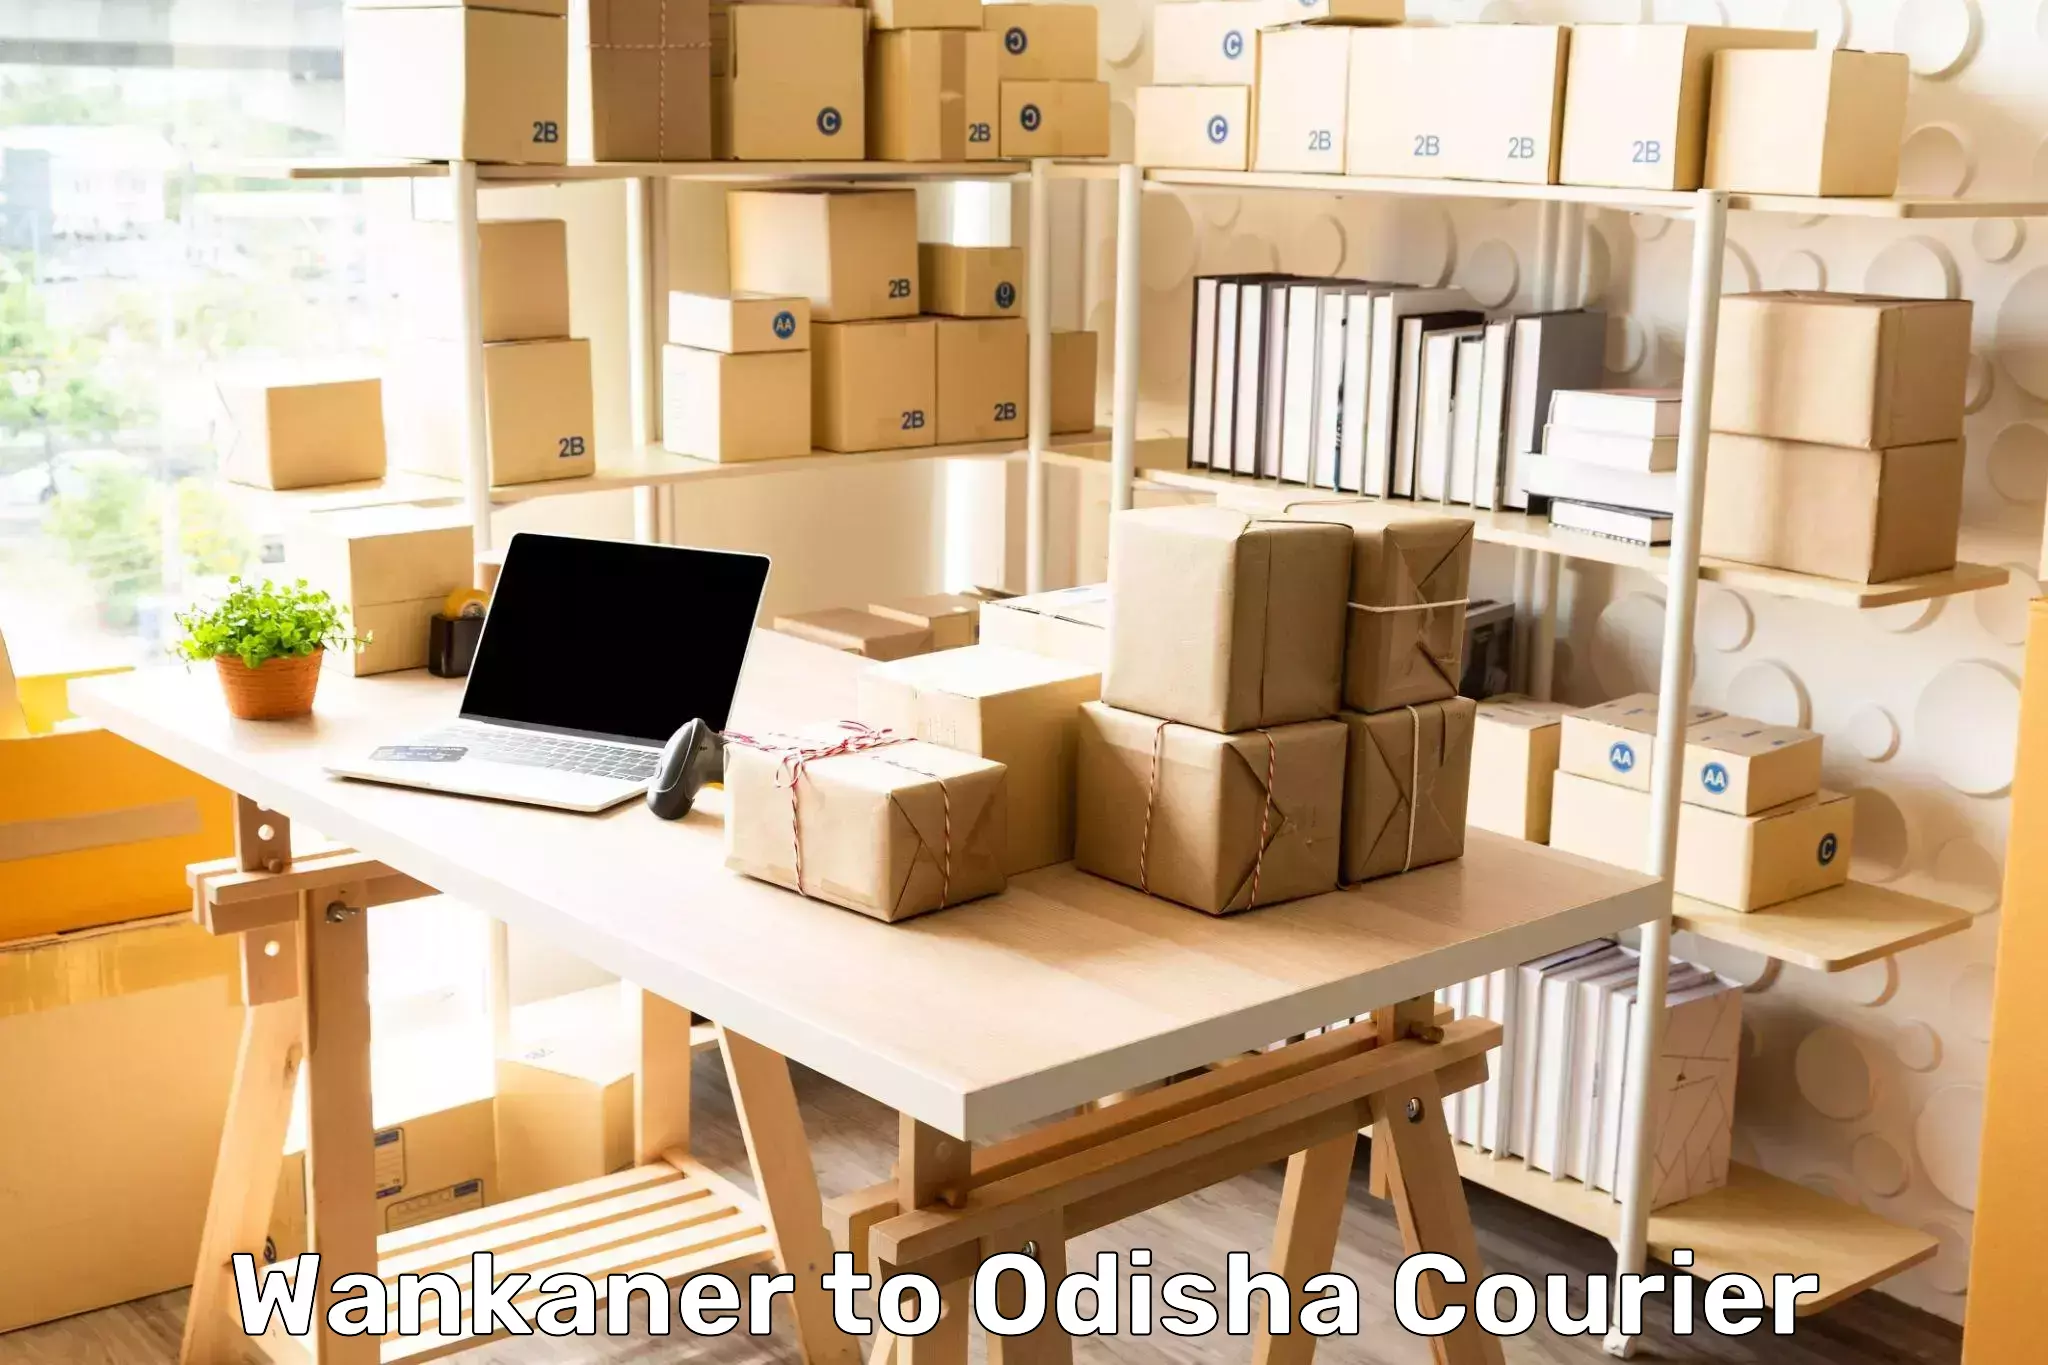 Personal courier services in Wankaner to Bhubaneswar